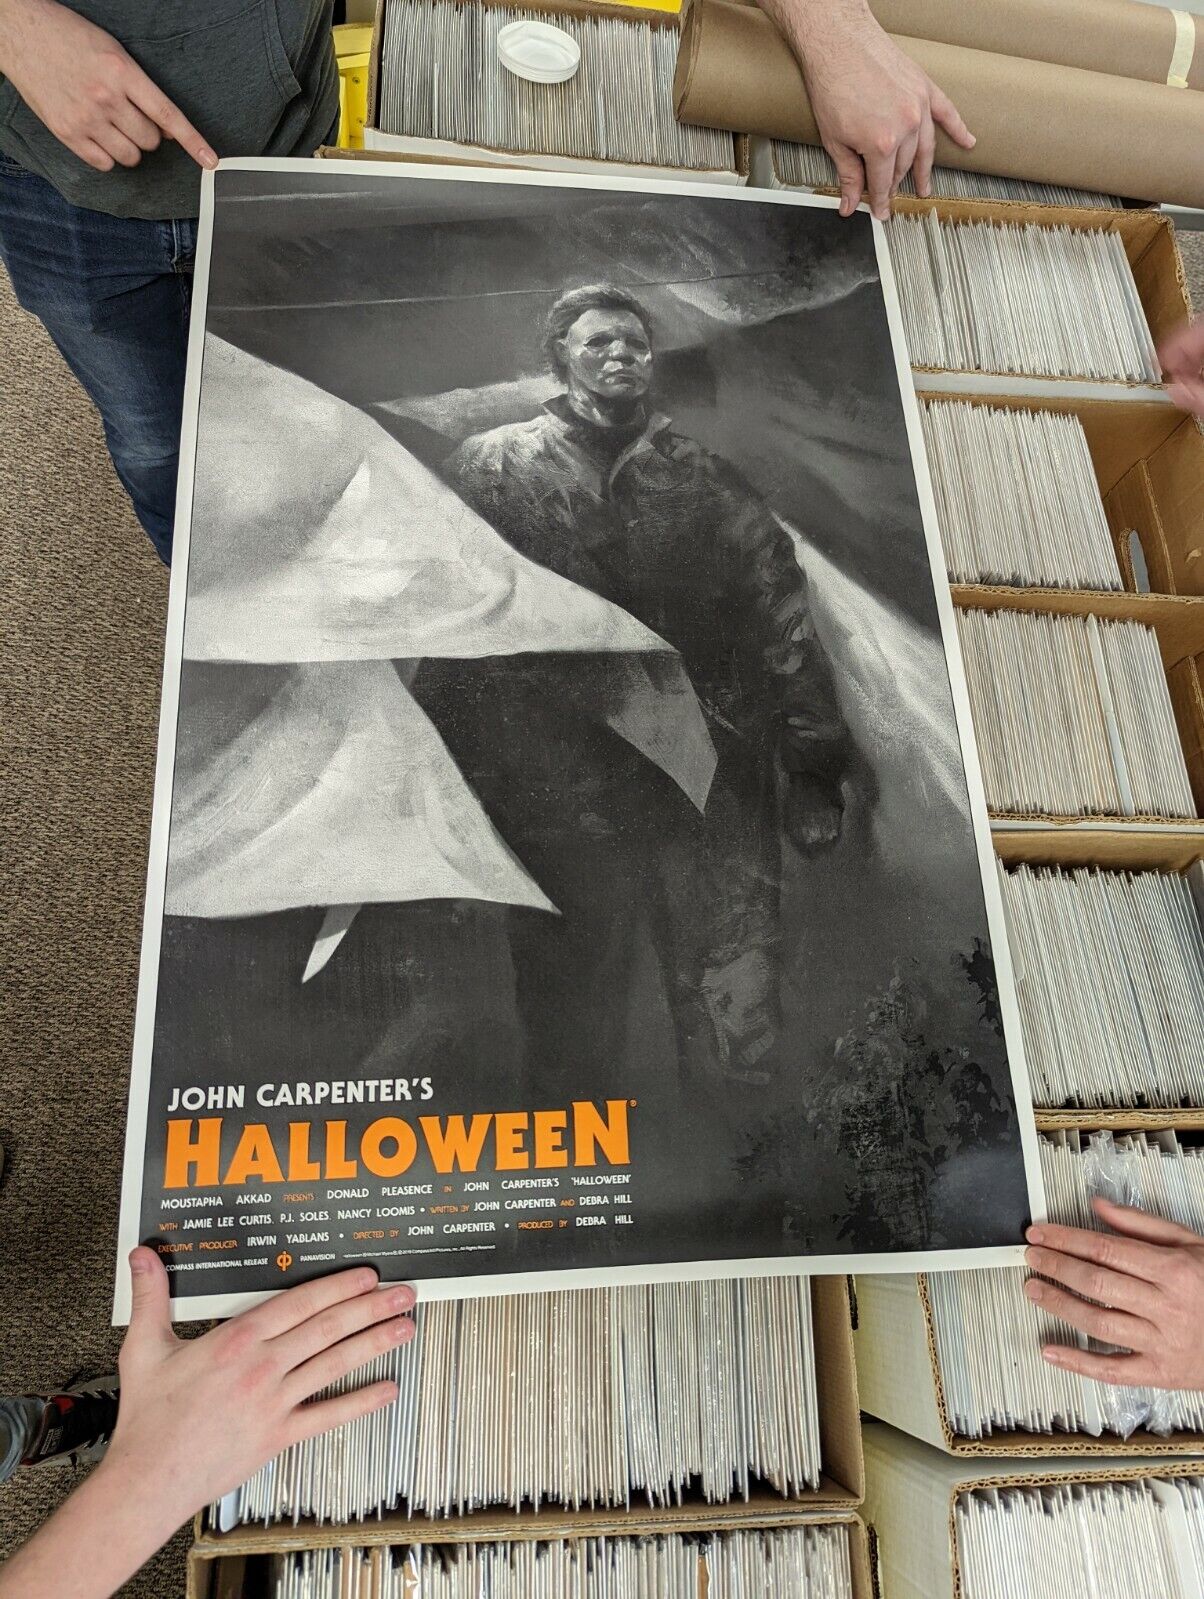 2019 Karl Fitzgerald Halloween Poster Print 24x36 Hand Numbered 188/225 Limited